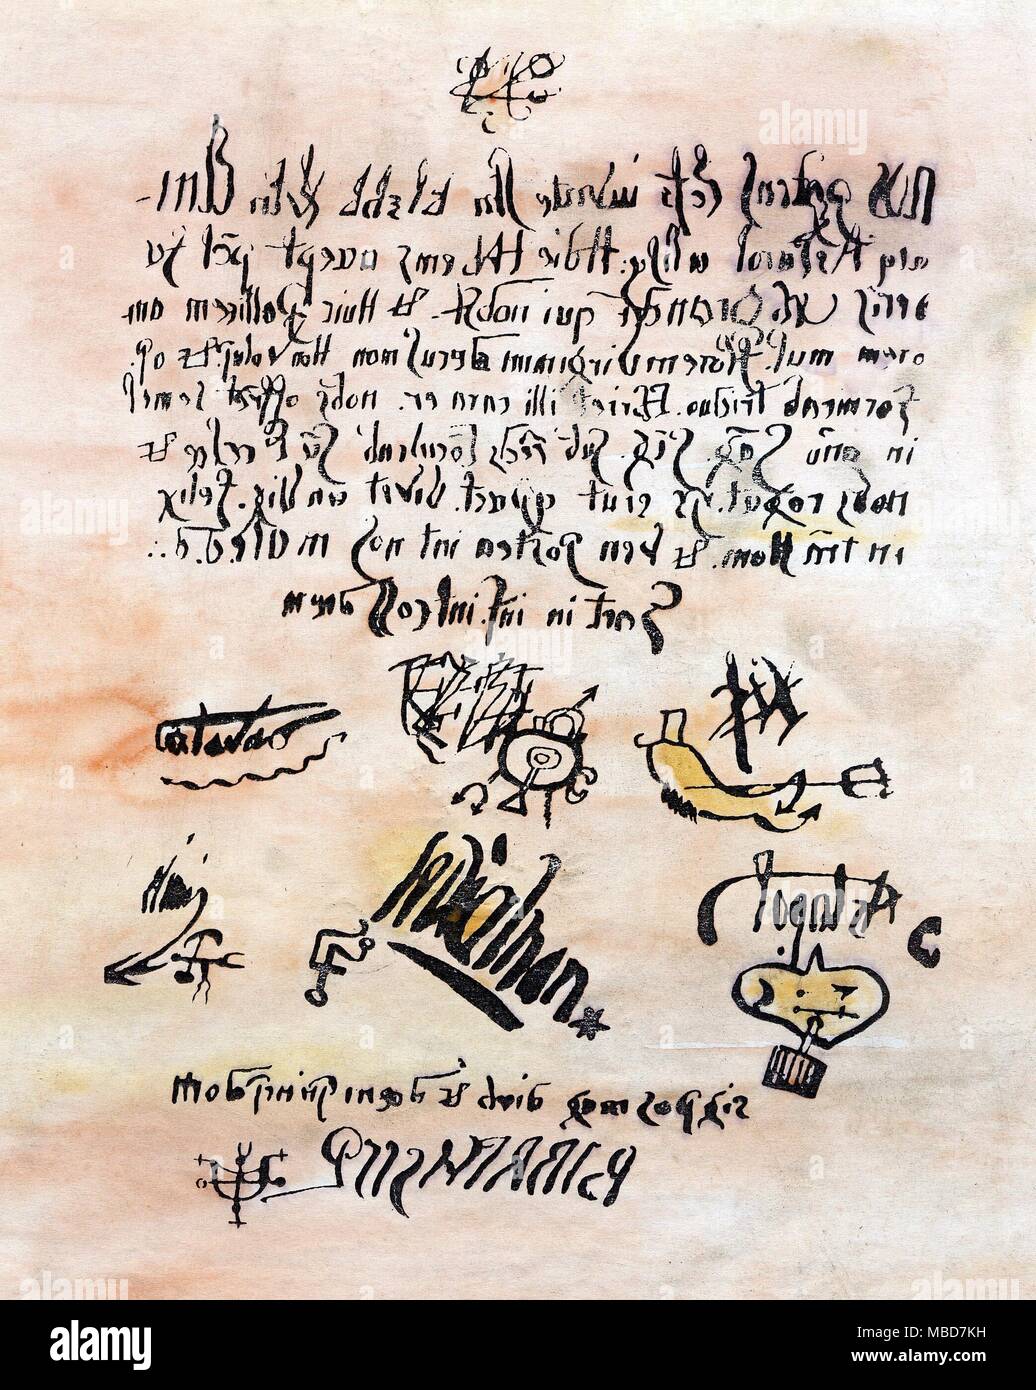 PACT - DEMONS A pact (certainly fraudulent, and constructed by enemies of the victim) supposedly drawn up by the French priest, Urbain Grandier and seven demons, and used in evidence at his trial at Loudun, in 1634. Written in mirror writing. With the aid of a mirror, it is possible to make out the supposed signatures and (entirely fanciful) sigils of Satanas, Beelzebub, Lucifer [contracted to Lcfr], Elimi, Leviathan and Astaroth. It is subscripted by the alleged amanuensis (scriptor), the demon Baalberith (contracted to Blbrth scrpt), and his sigil. Partly on the evidence of this docum Stock Photo